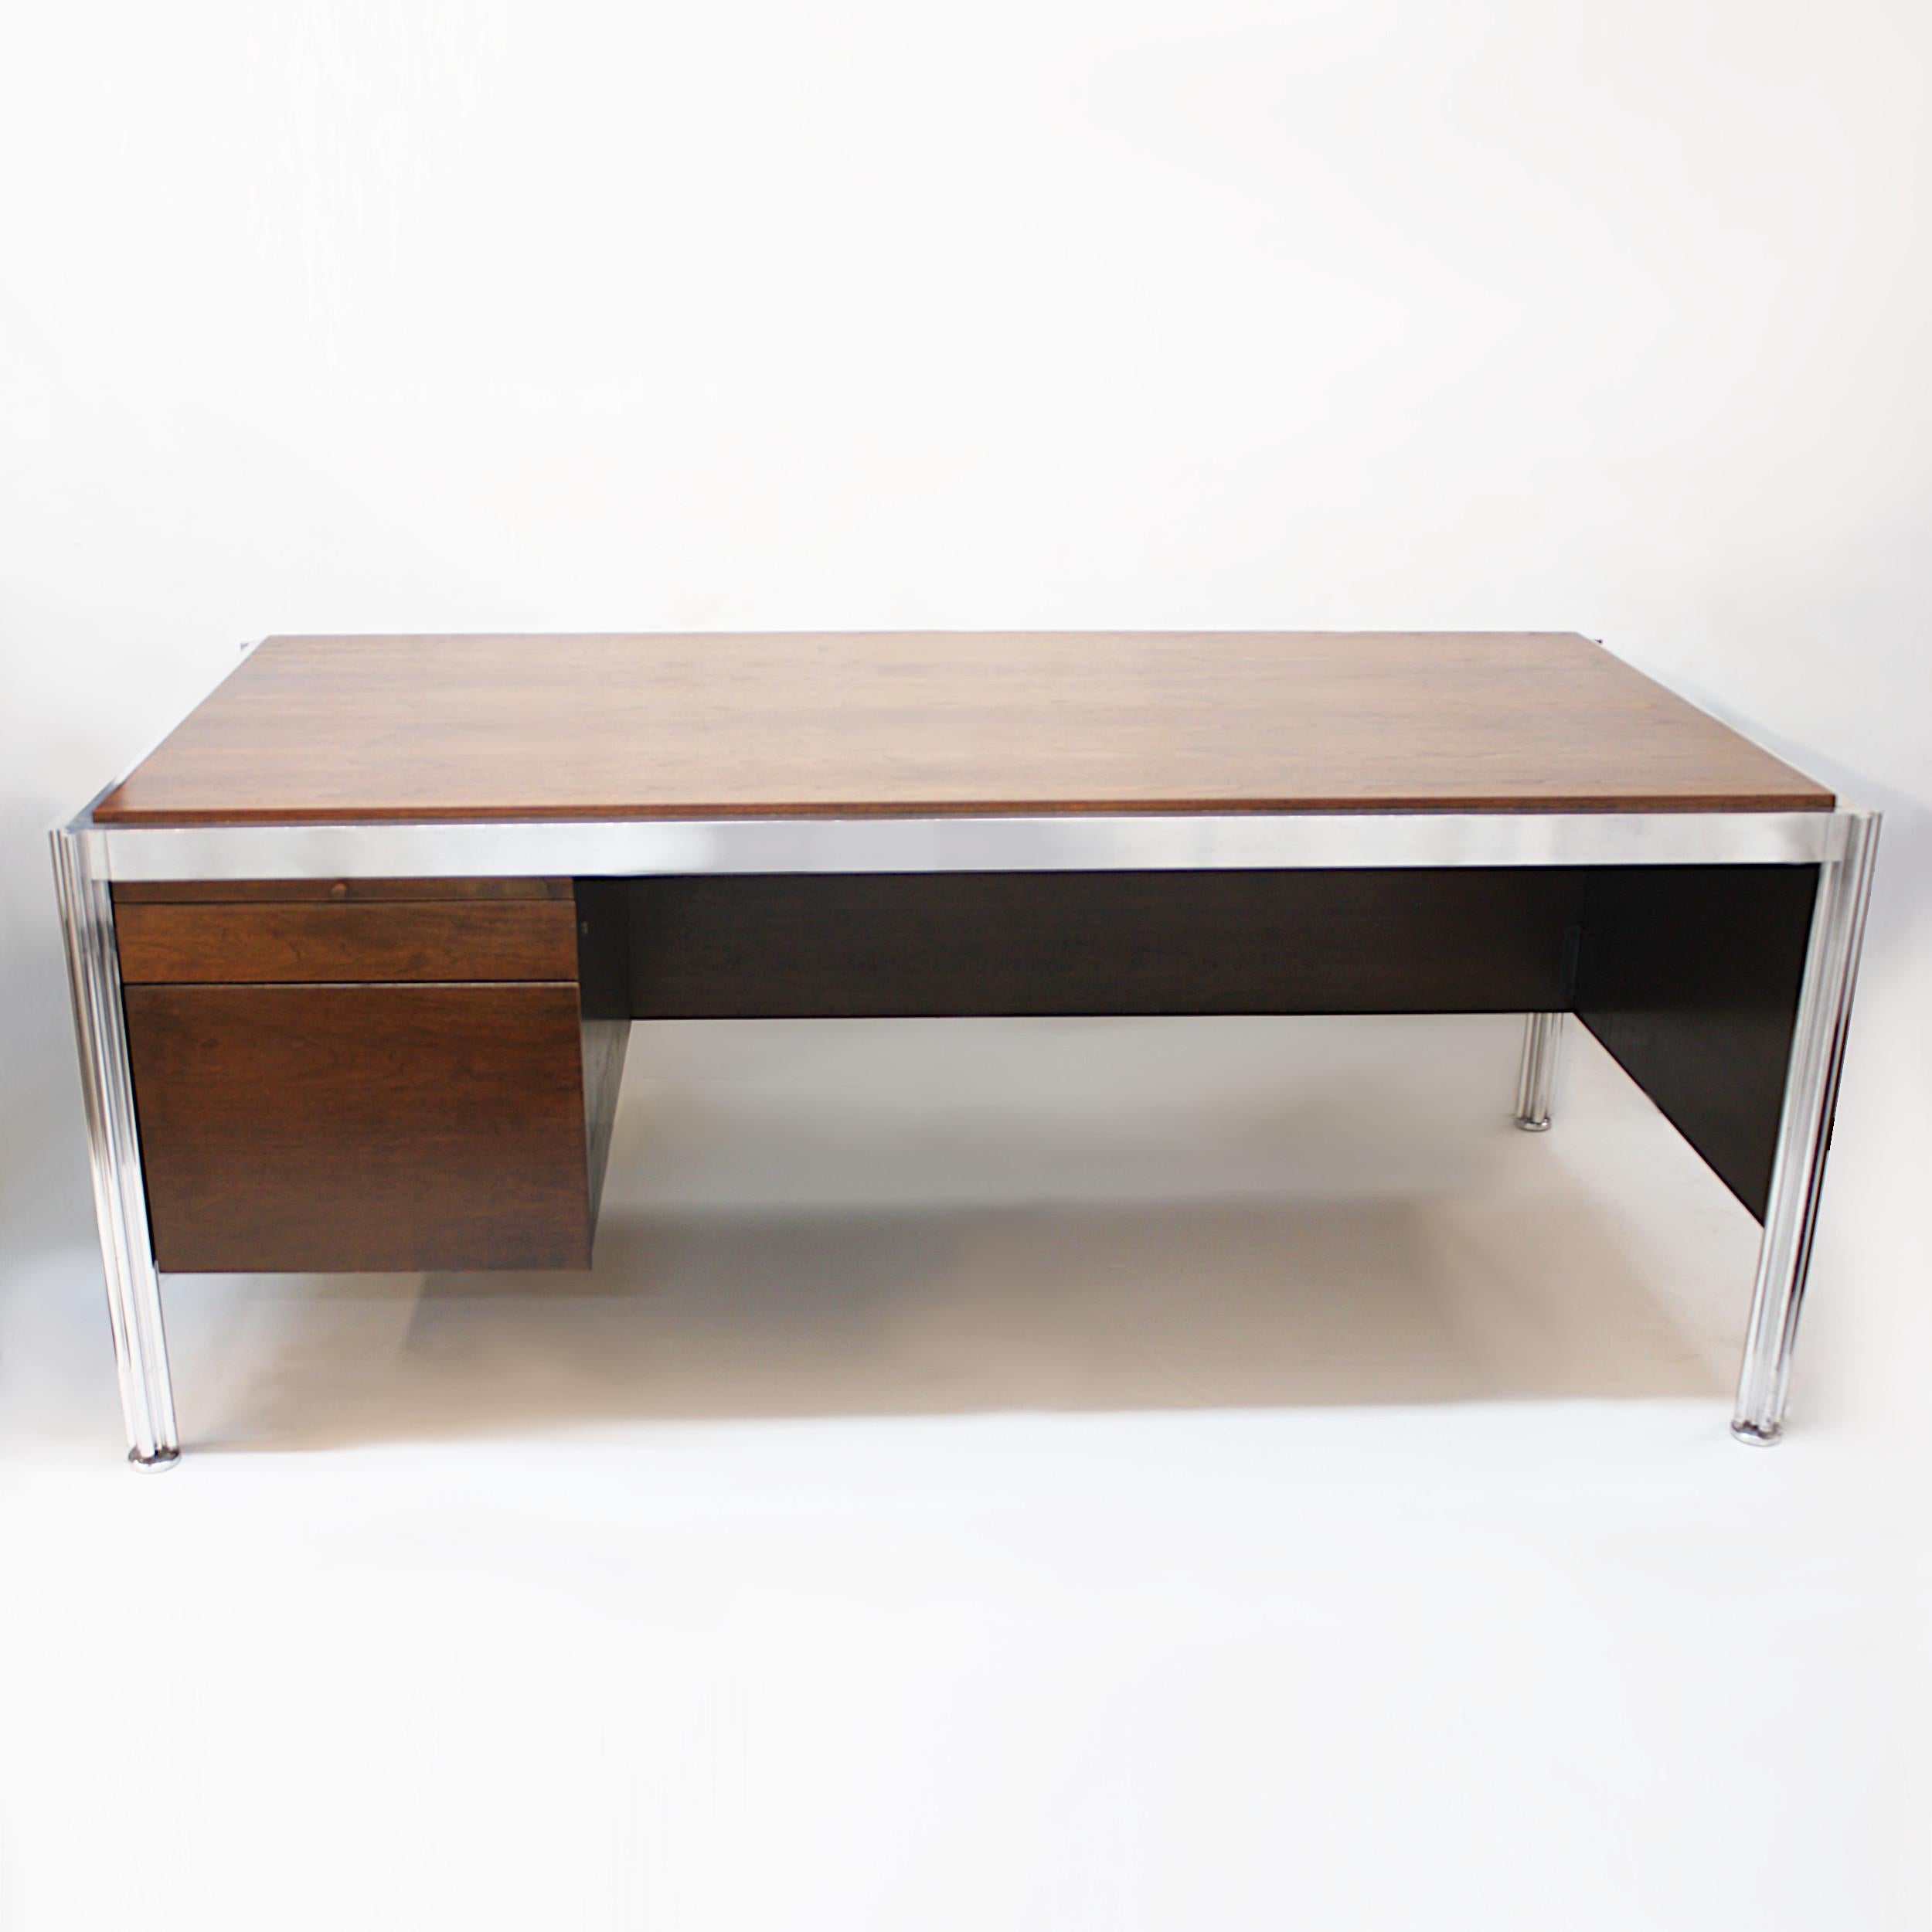 North American 1970s Mid-Century Modern Walnut and Aluminum Executive Desk by George Ciancimino